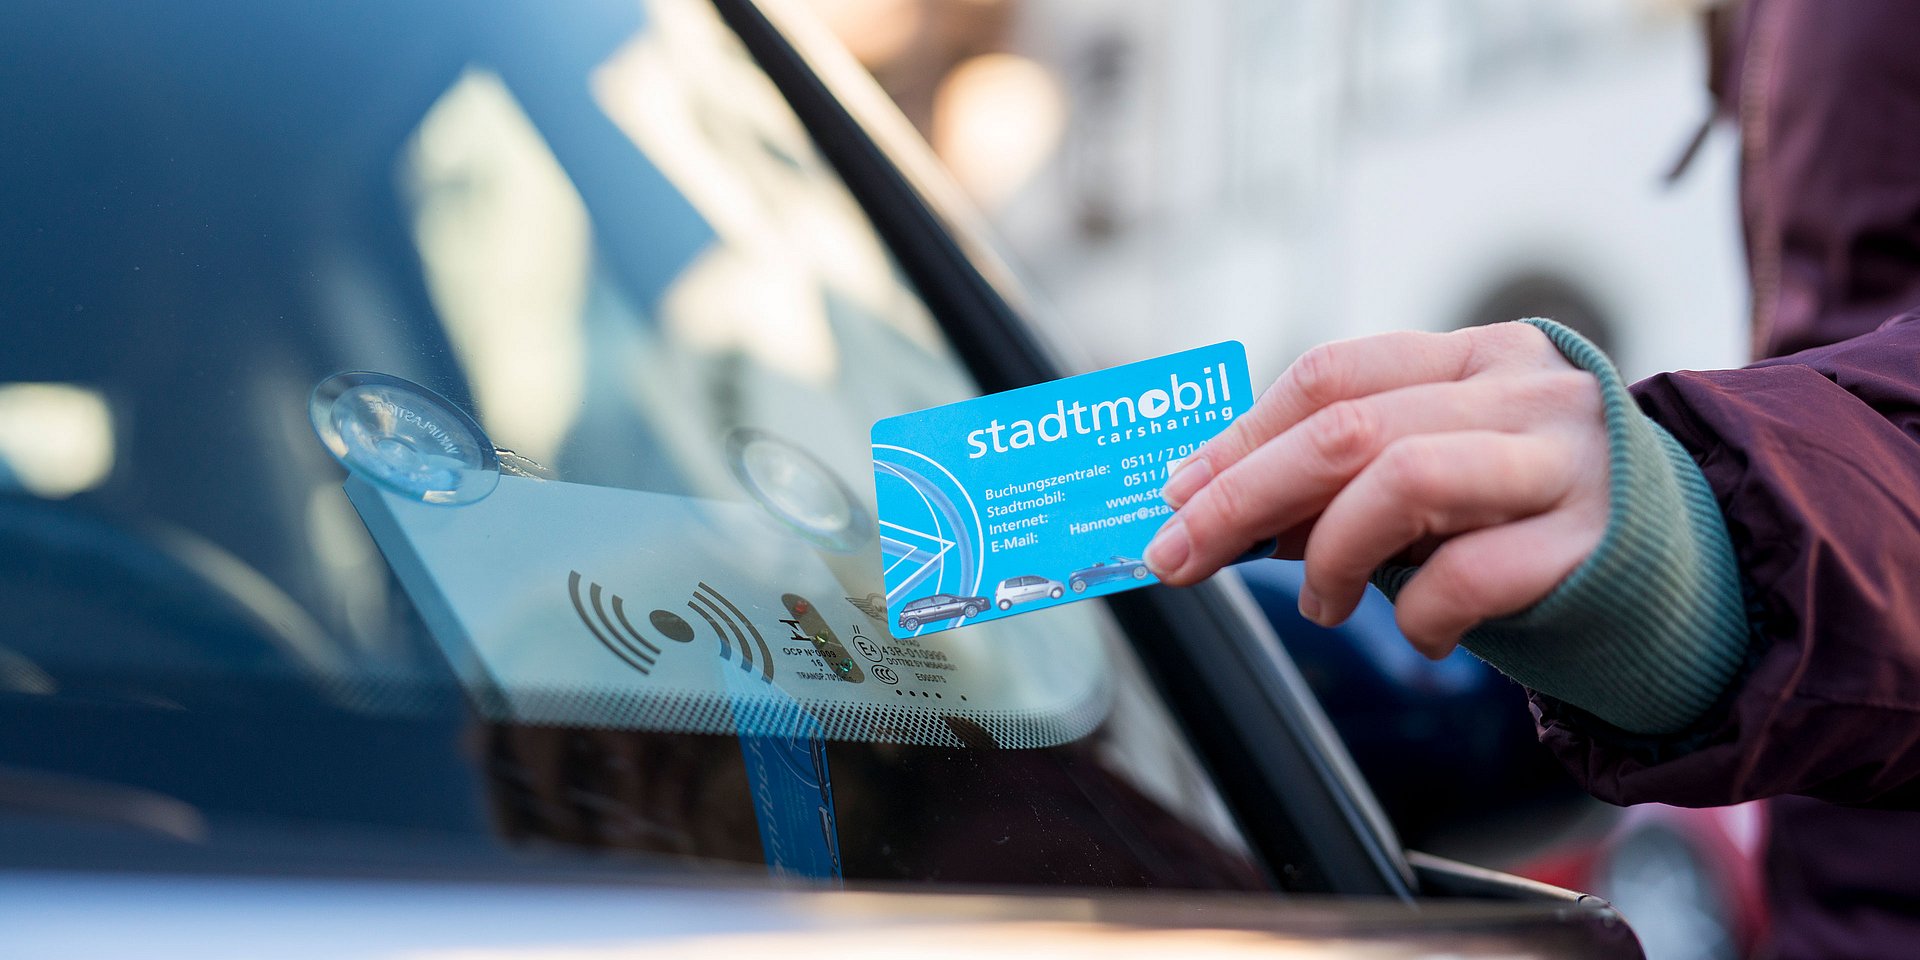 Detail image of an access card held in front of the windshield of a stadtmobil car